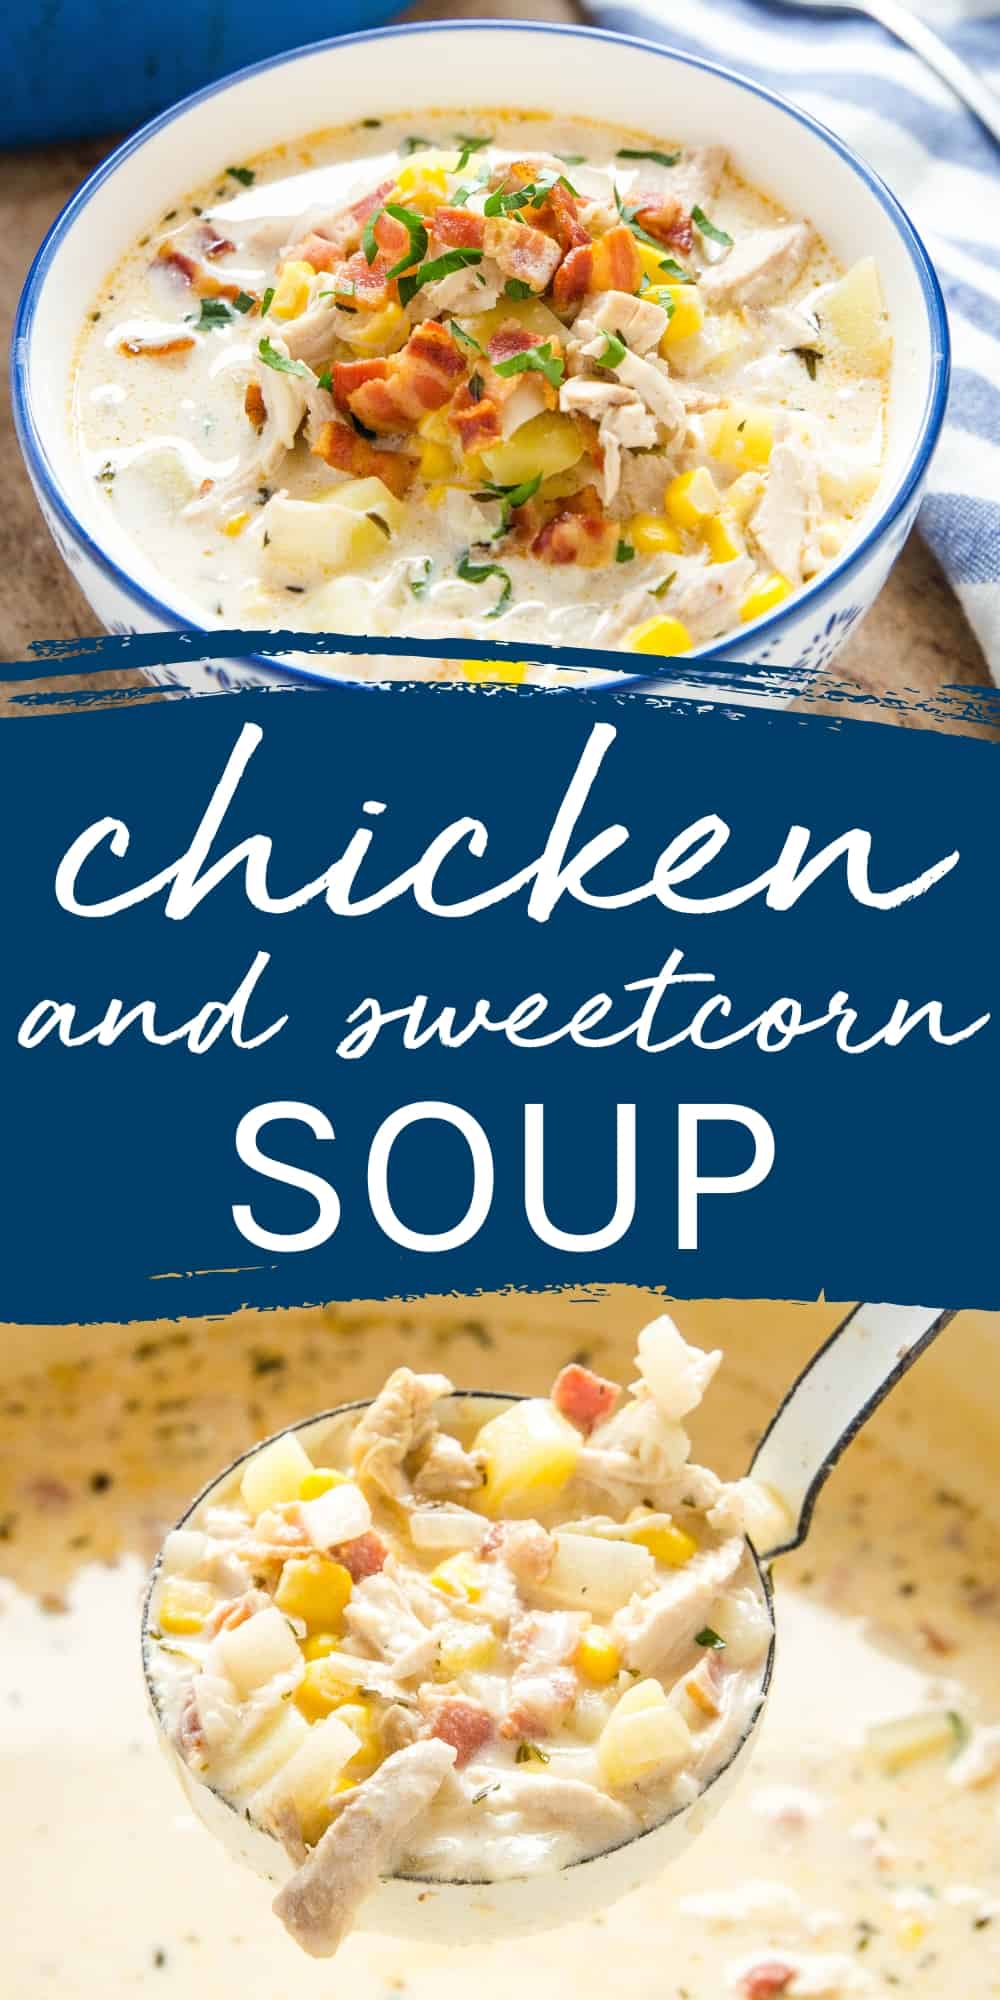 This Chicken Corn Chowder recipe is a hearty & filling soup made with shredded chicken, potatoes, corn & bacon in a thick, creamy broth. Recipe from thebusybaker.ca! #chickencornchowder #cornchowder #chowder #homemadechowder #homemadesoup #comfortfood #soup #cornsoup #chickencornsoup via @busybakerblog